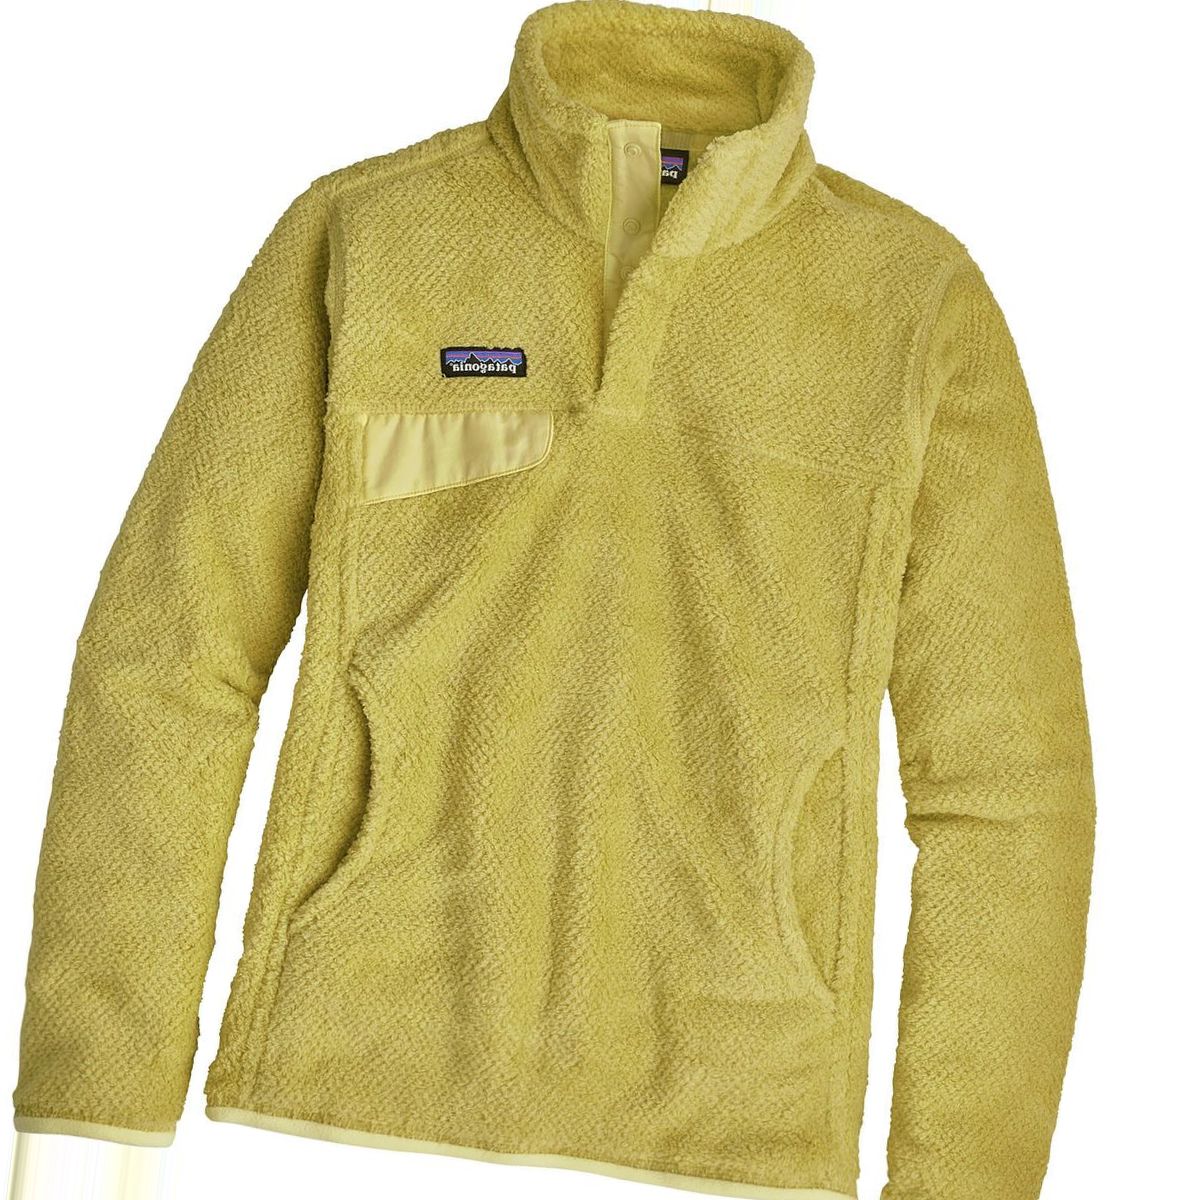 Patagonia Re-Tool Snap-T Fleece Pullover - Women's